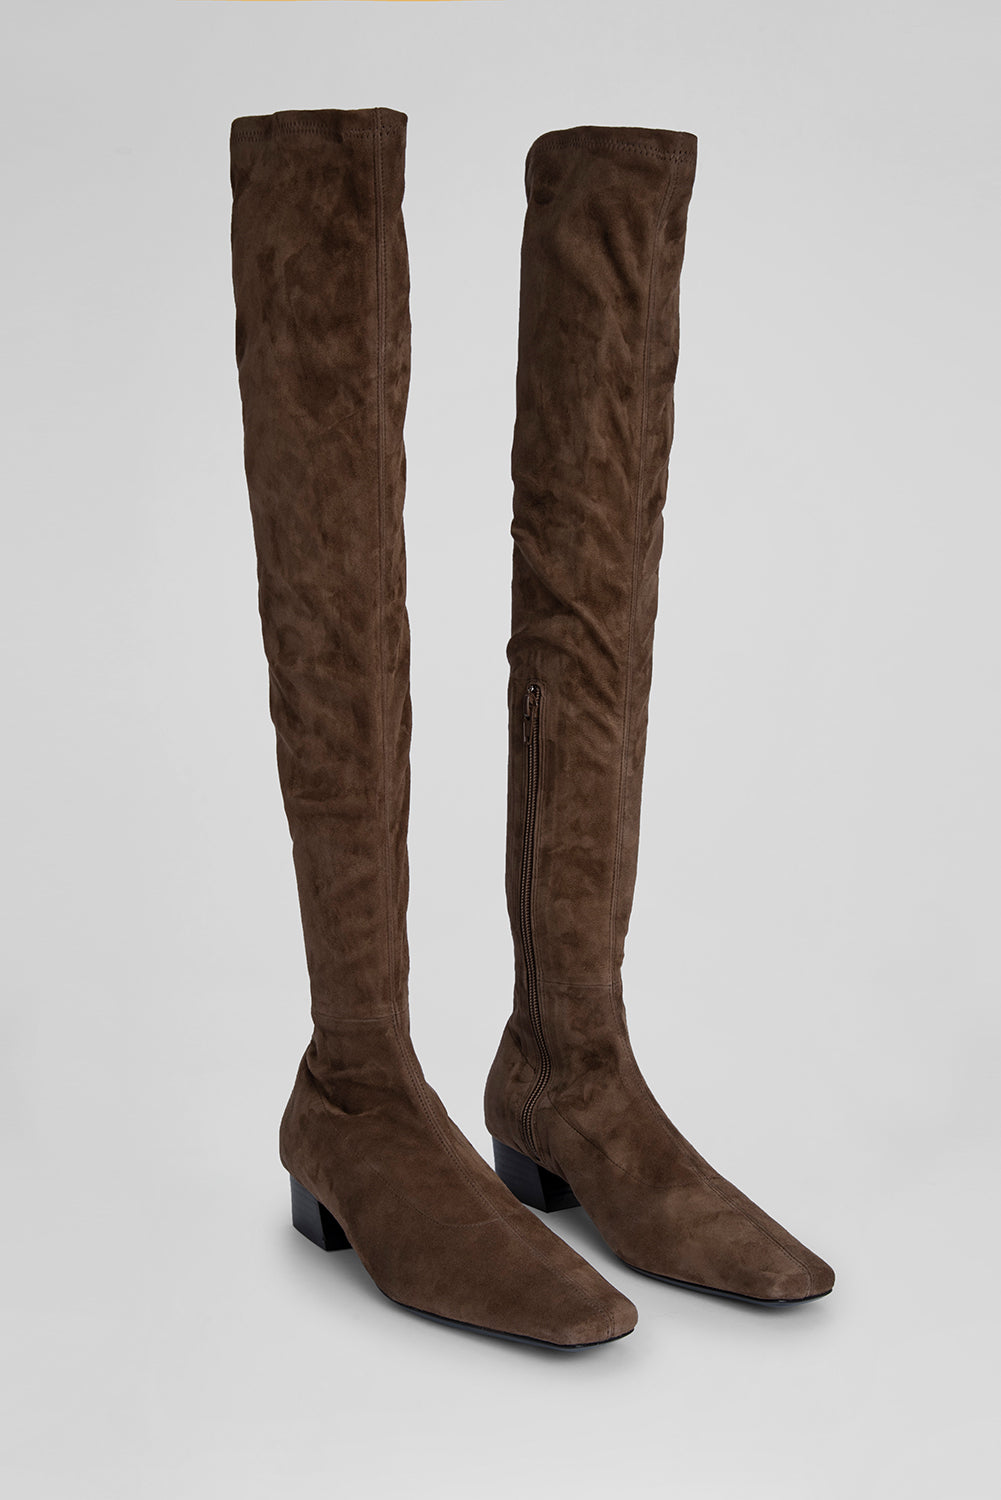 Colette Wood Stretch Suede Leather